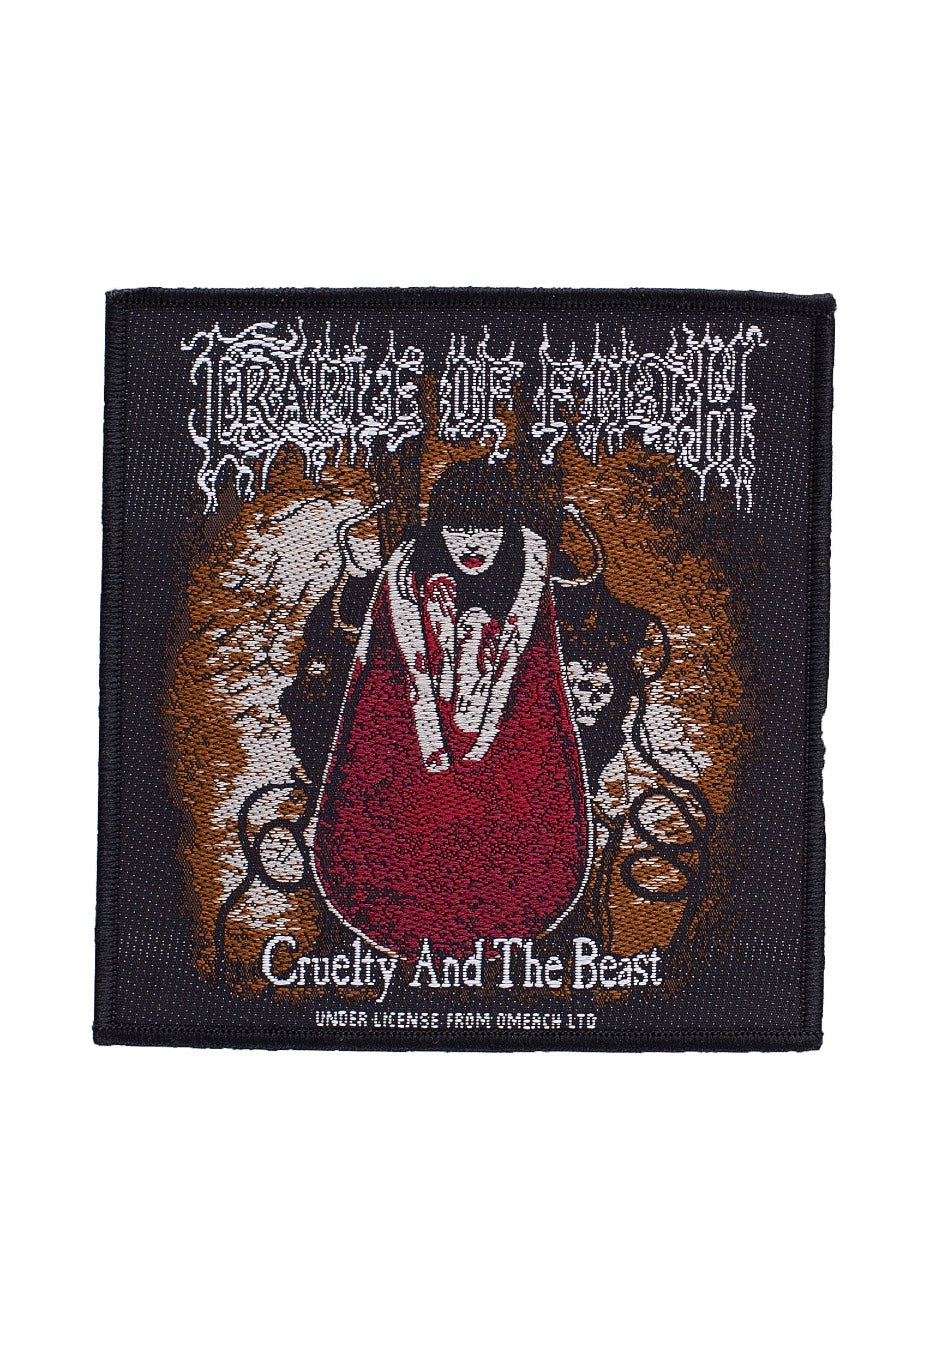 Cradle Of Filth - Cruelty And The Beast - Patch